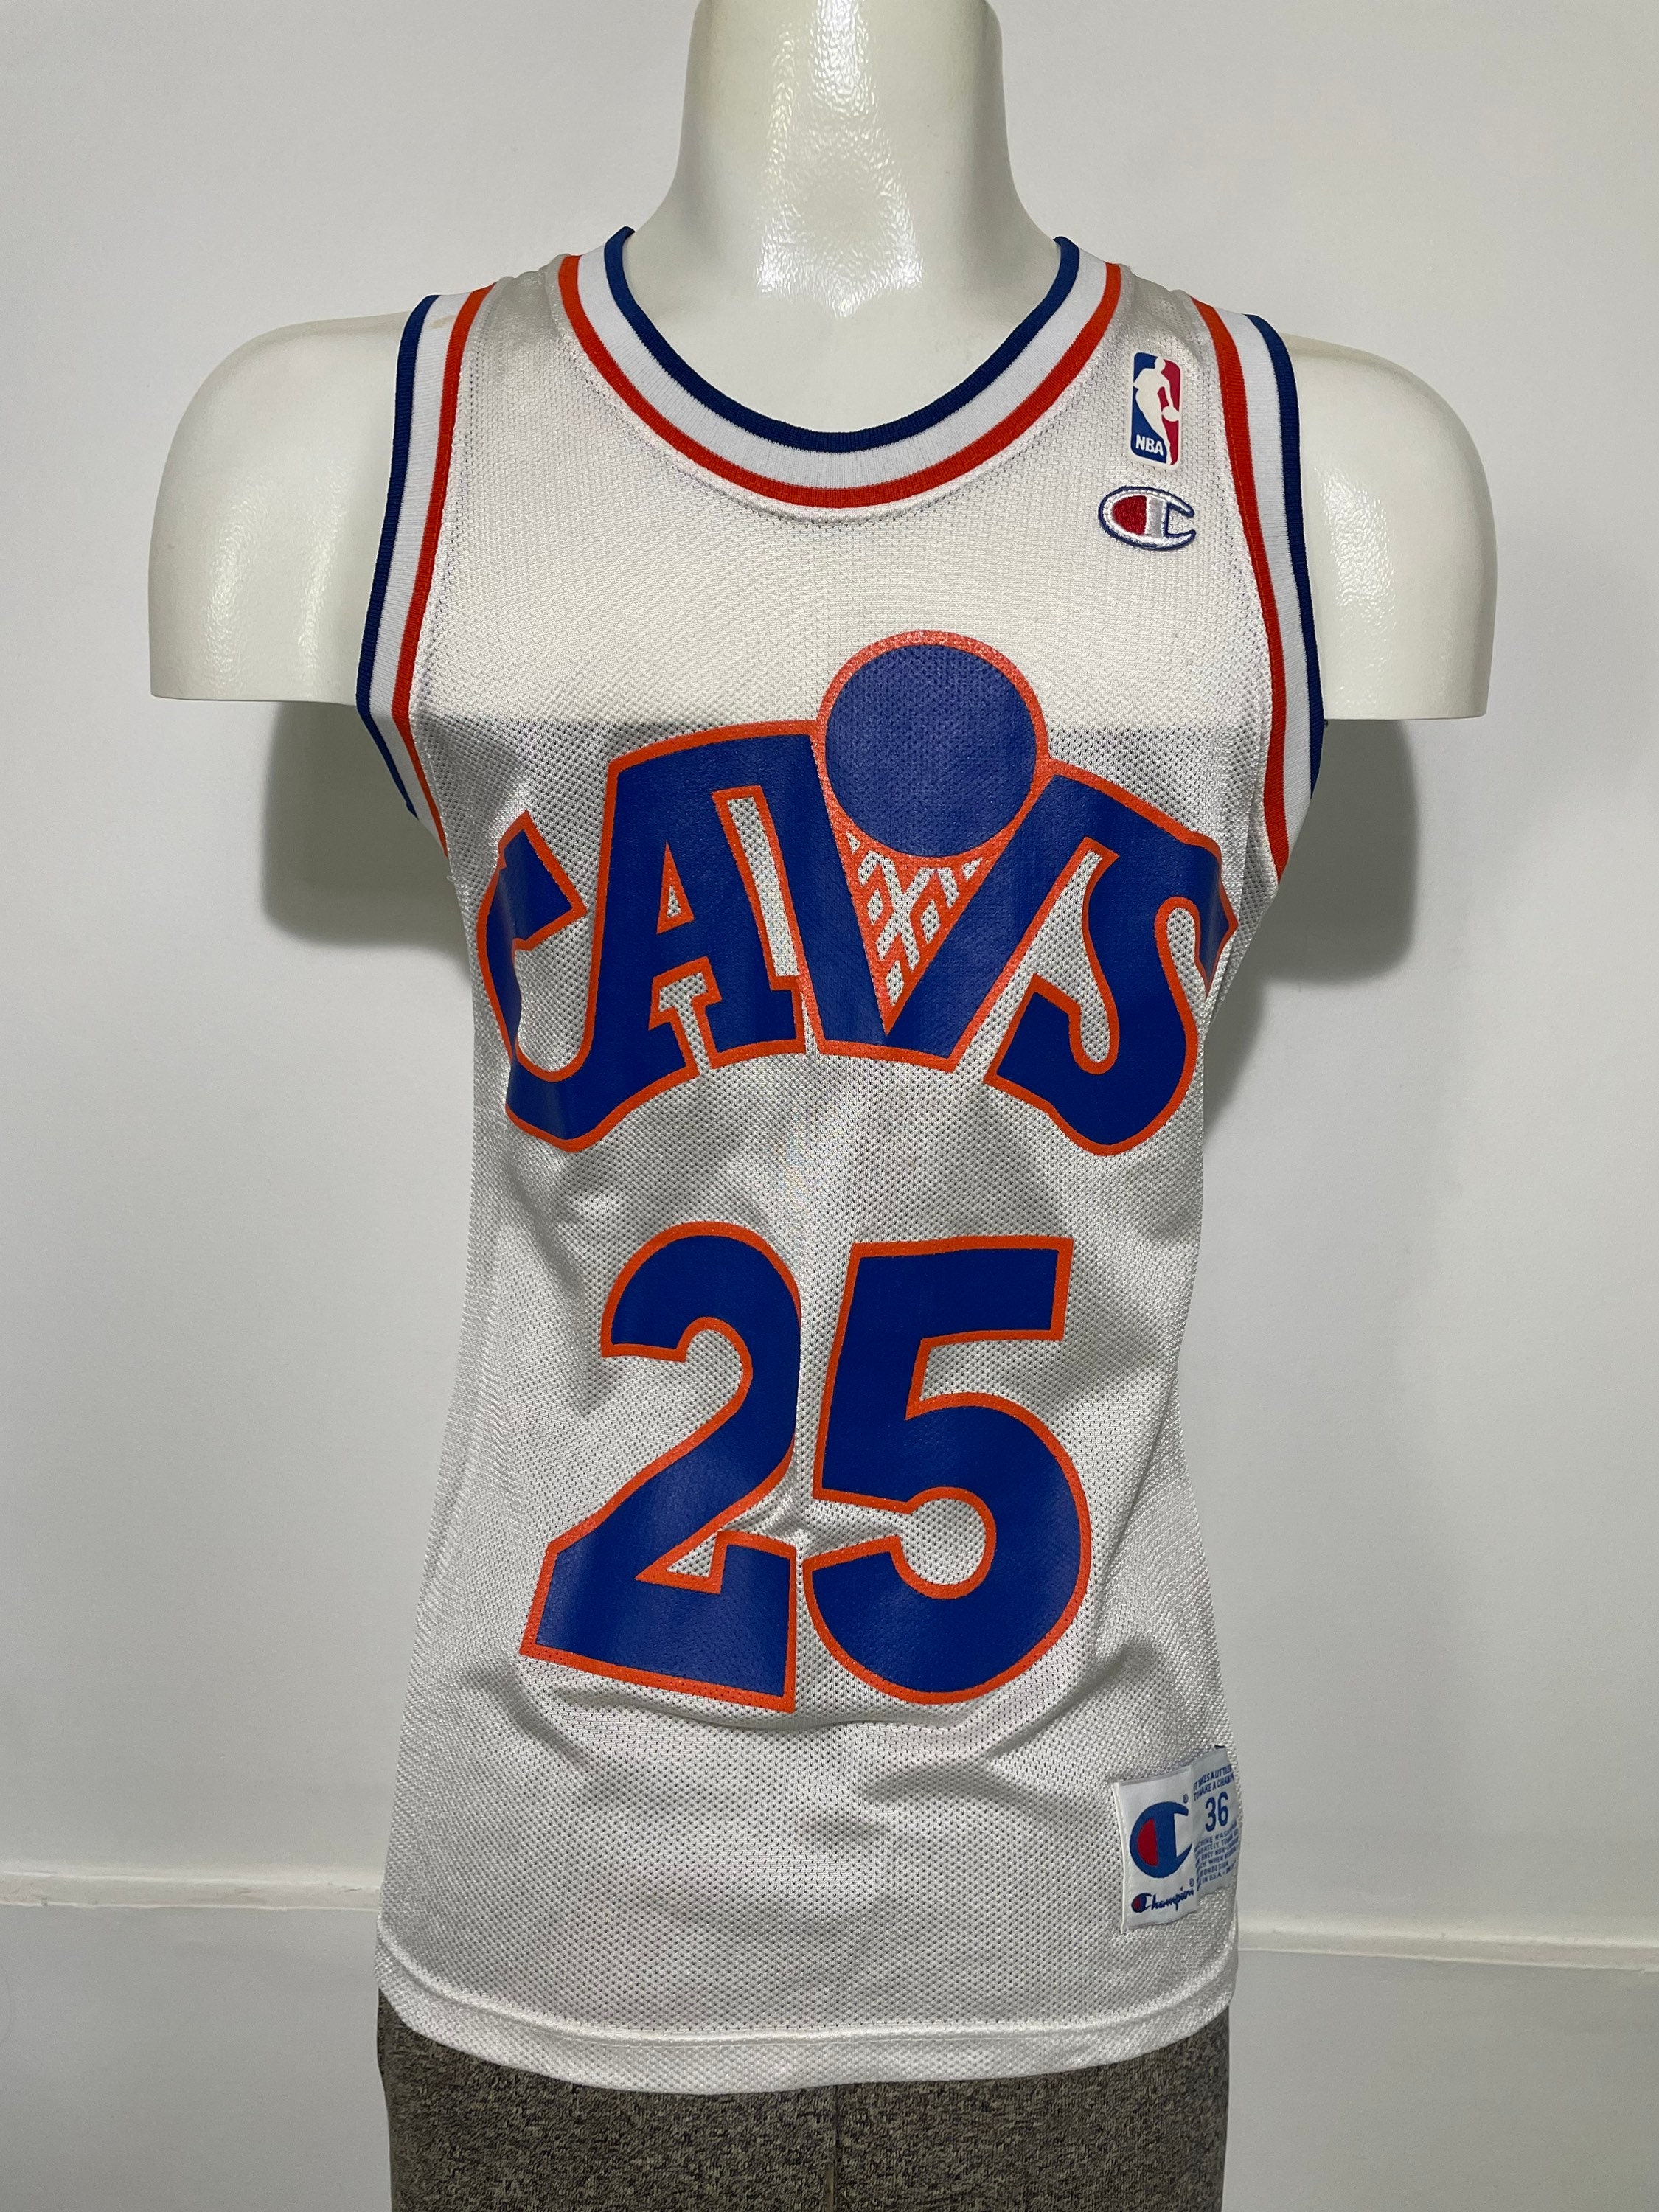 Rare Vintage Cleveland Cavaliers jersey // Mark Price White Jersey // retro Cavs // champion 36 // adult size small // Rare jersey #25